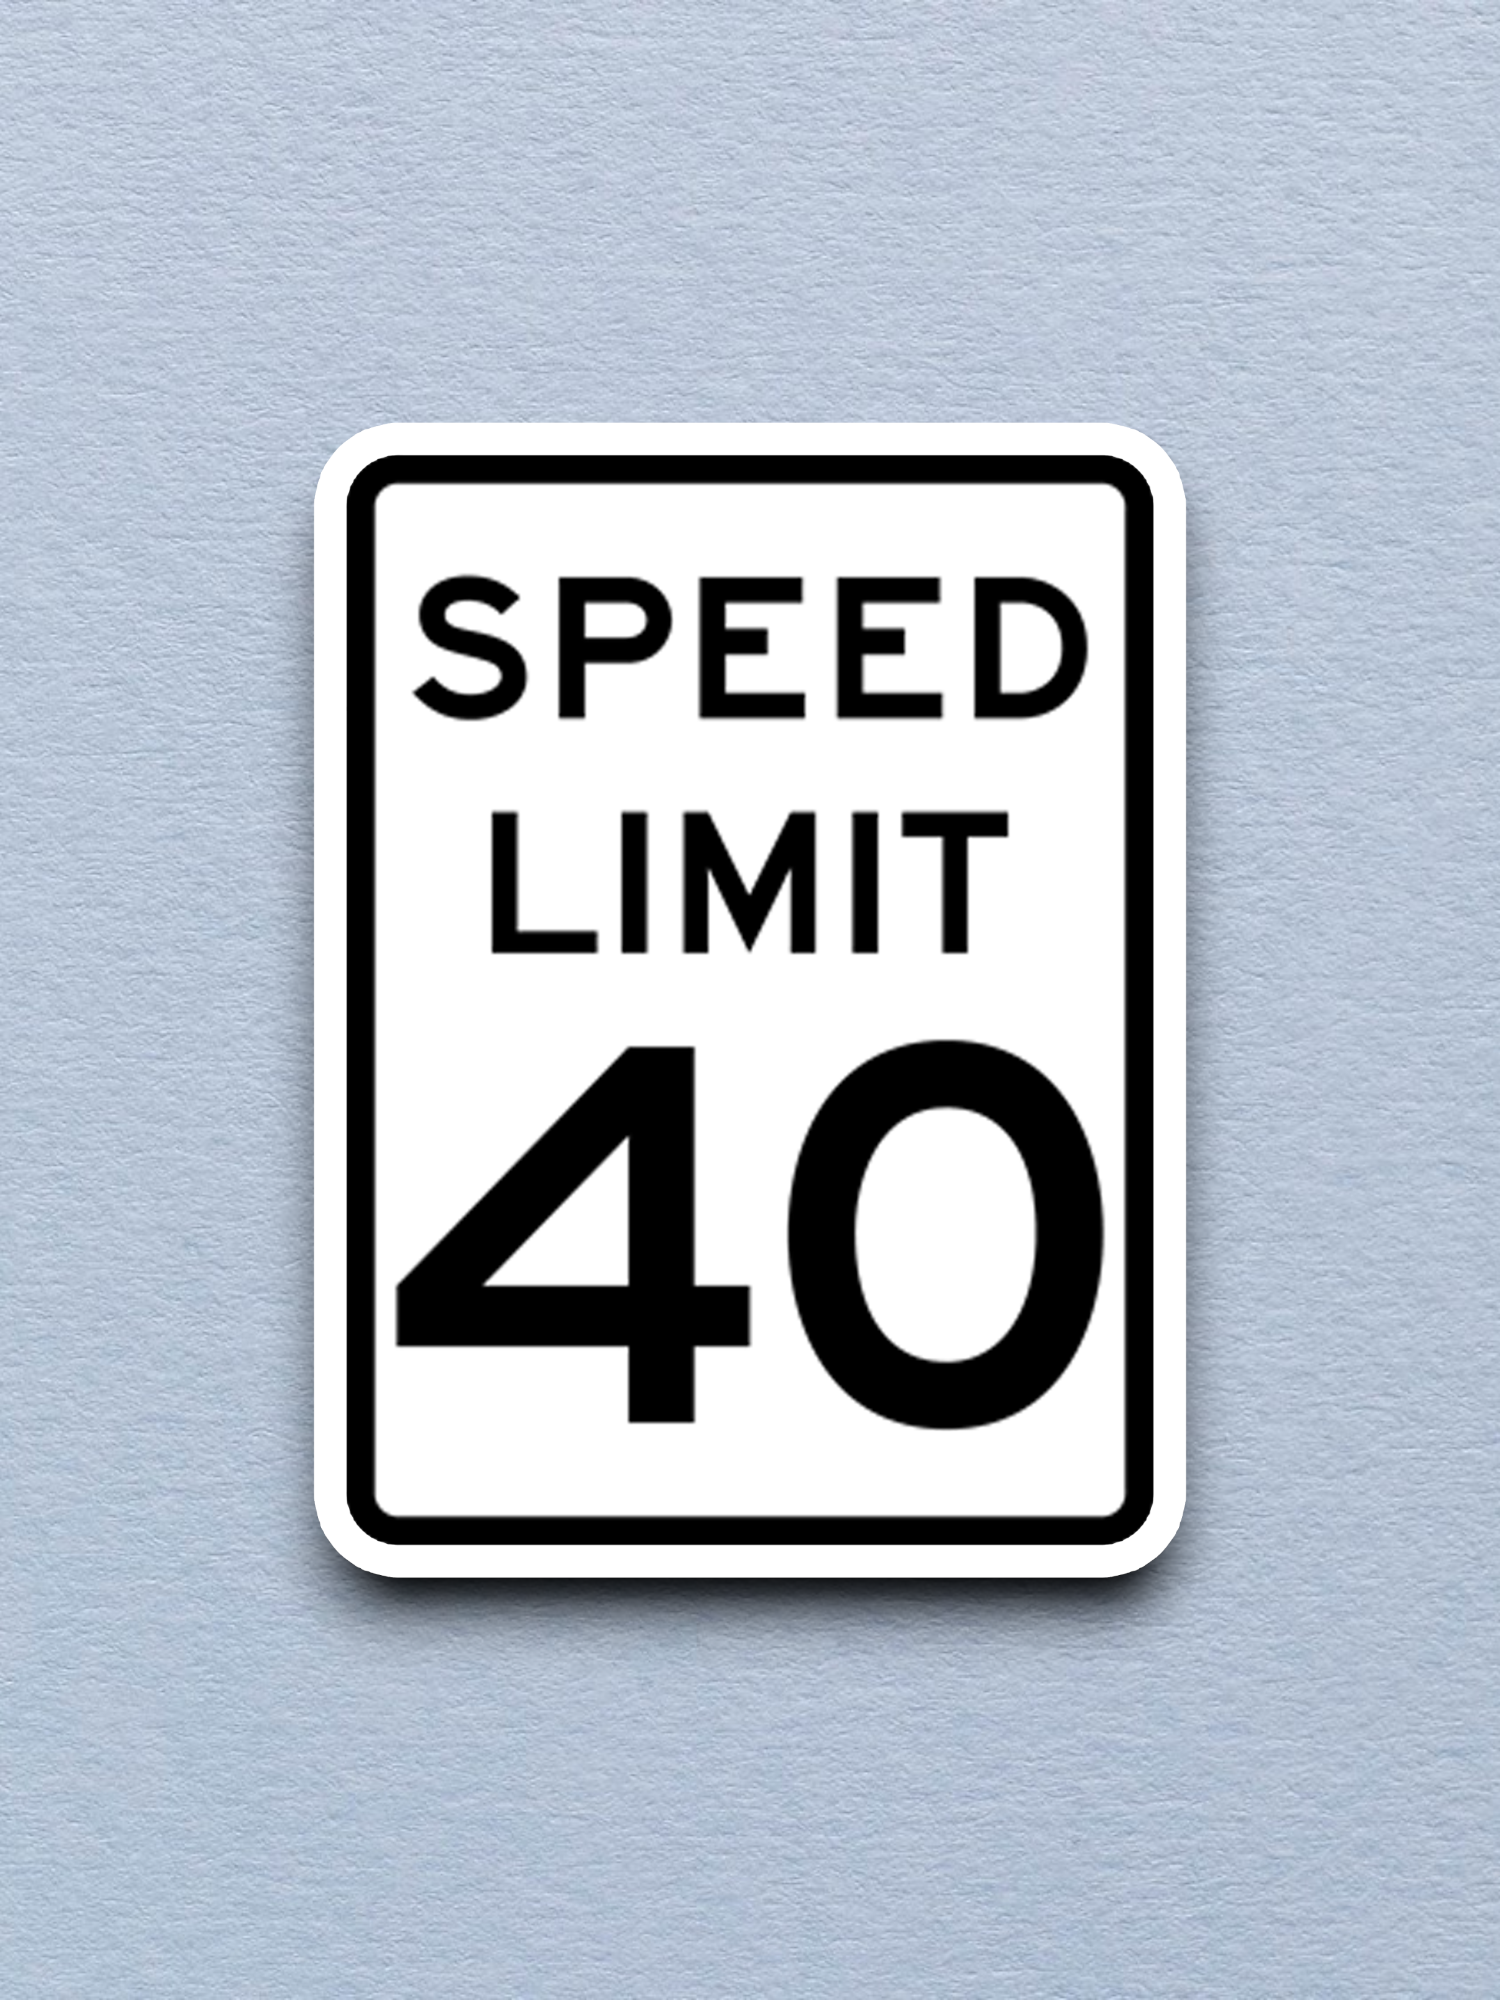 40 Miles Per Hour Speed Limit Road Sign Sticker